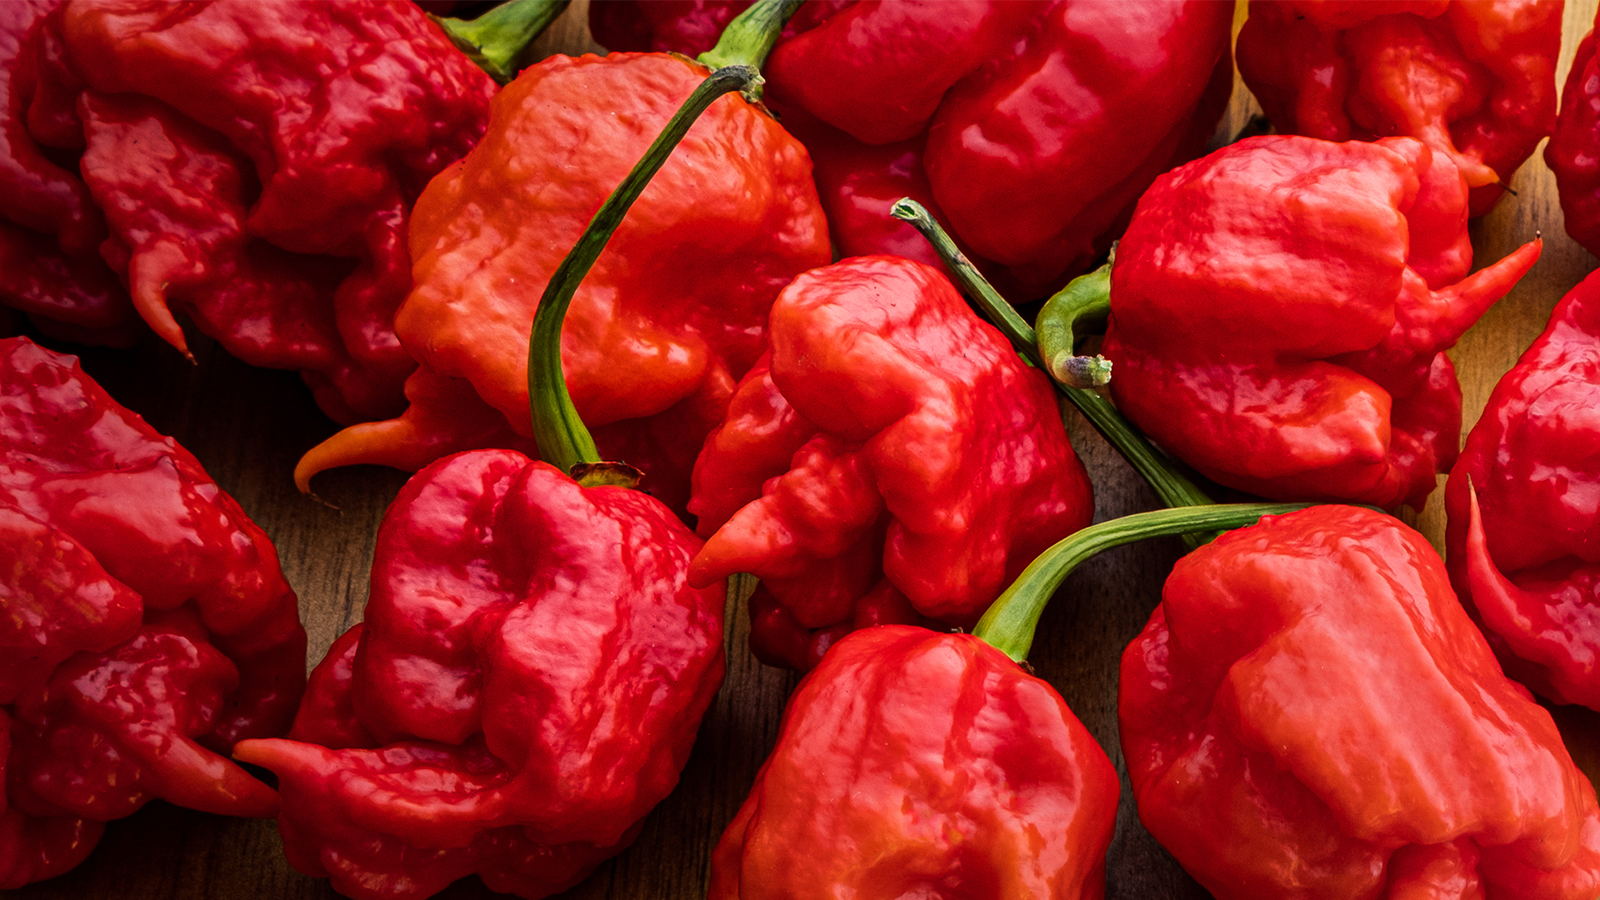 This is the record for eating the most Carolina Reaper, the